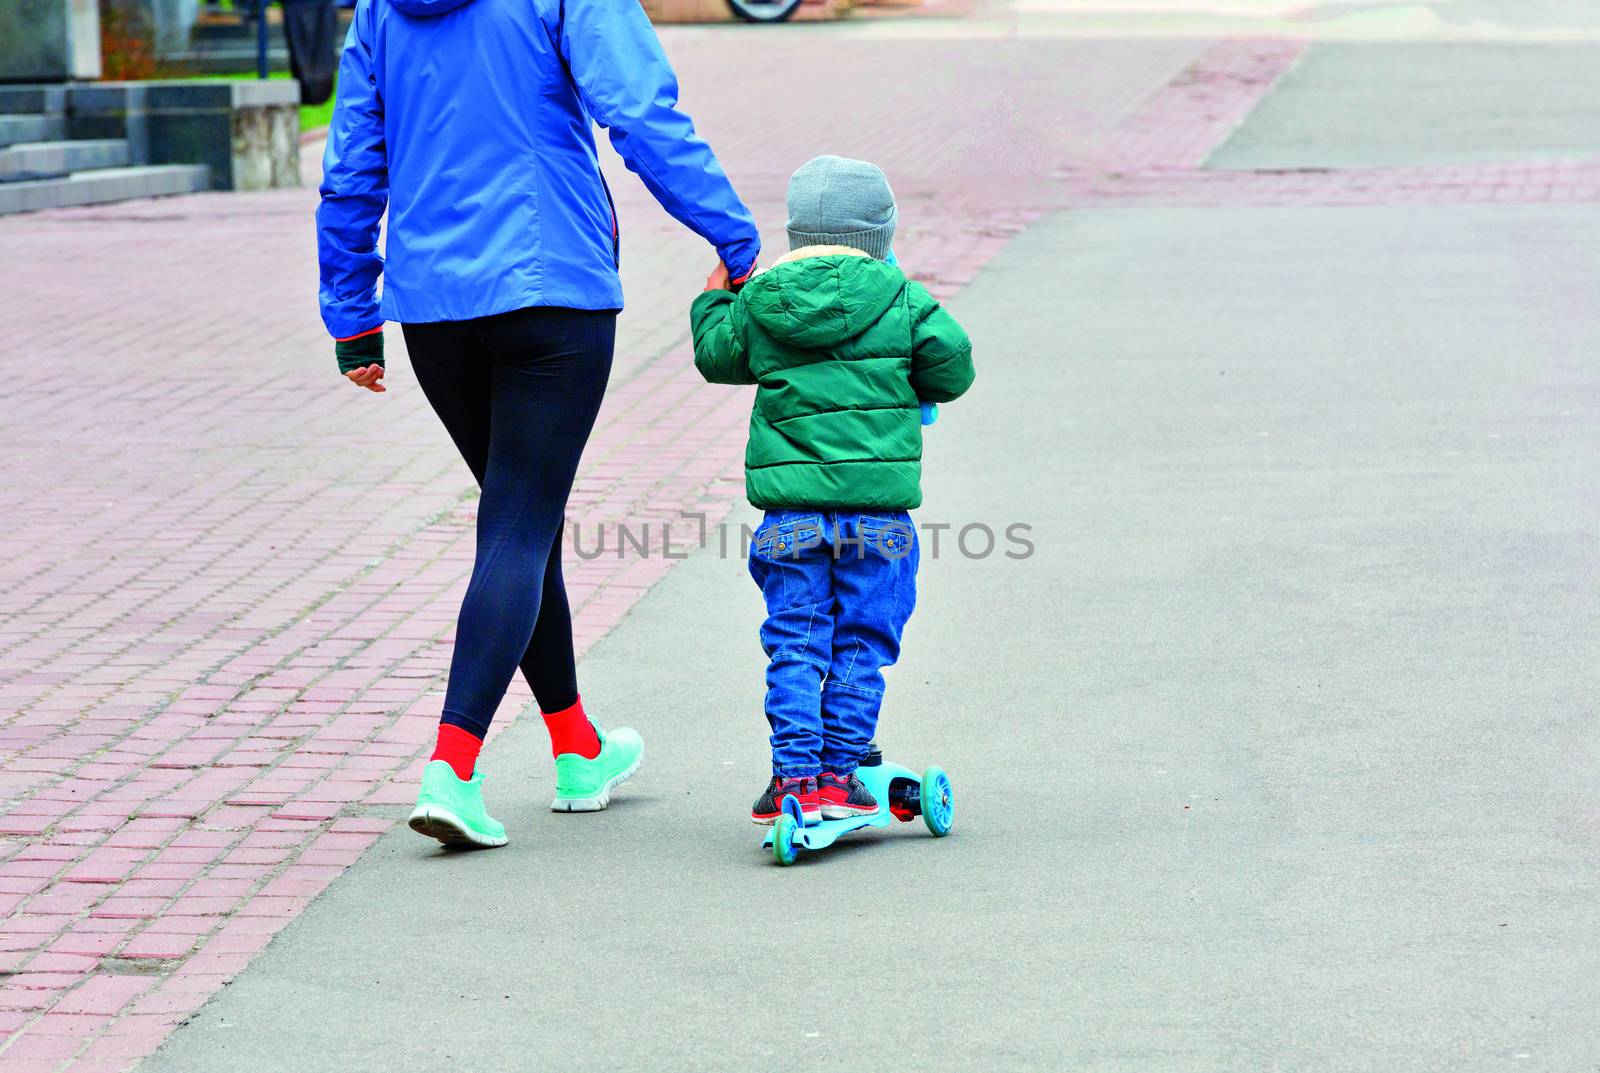 A child in funny baggy blue jeans and a green jacket on a children's scooter and his young mother in a sports blue jacket walk on the asphalt sidewalk of a city street.